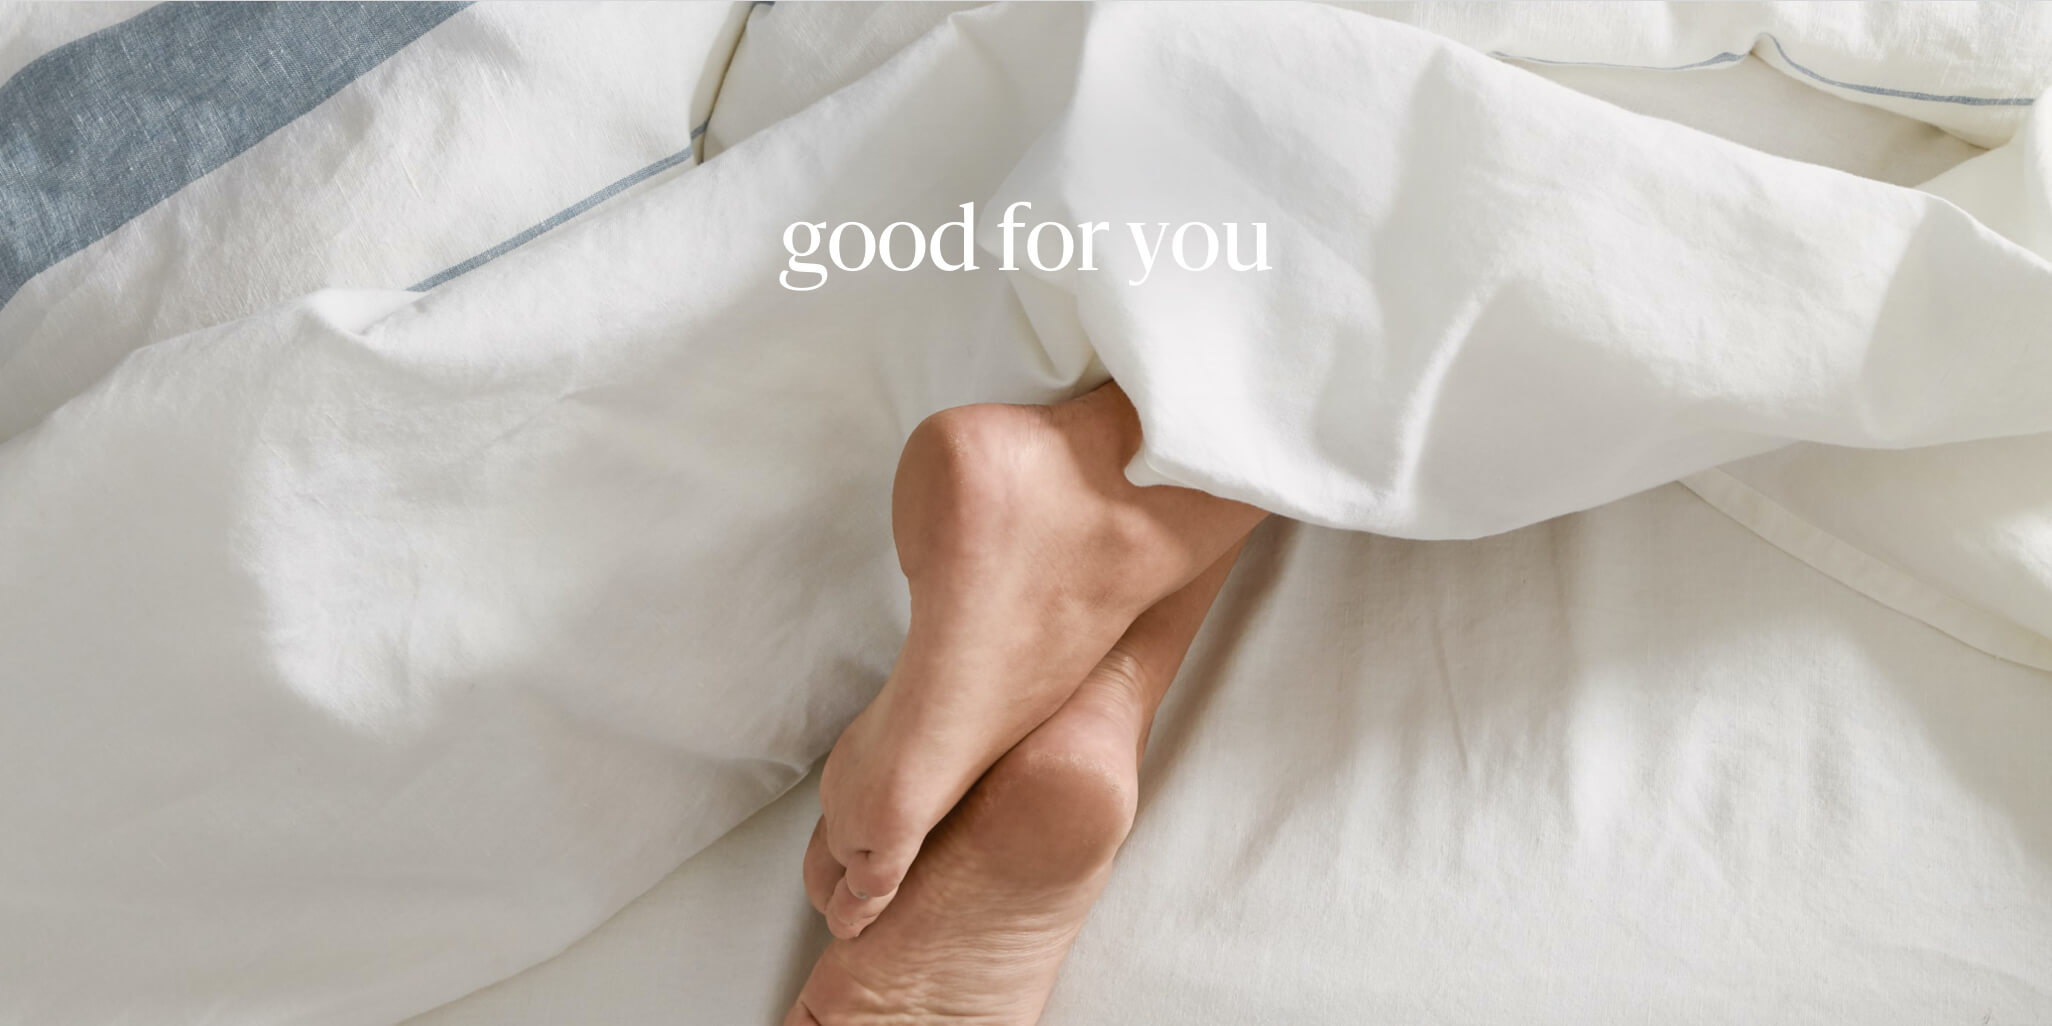 Good-for-you